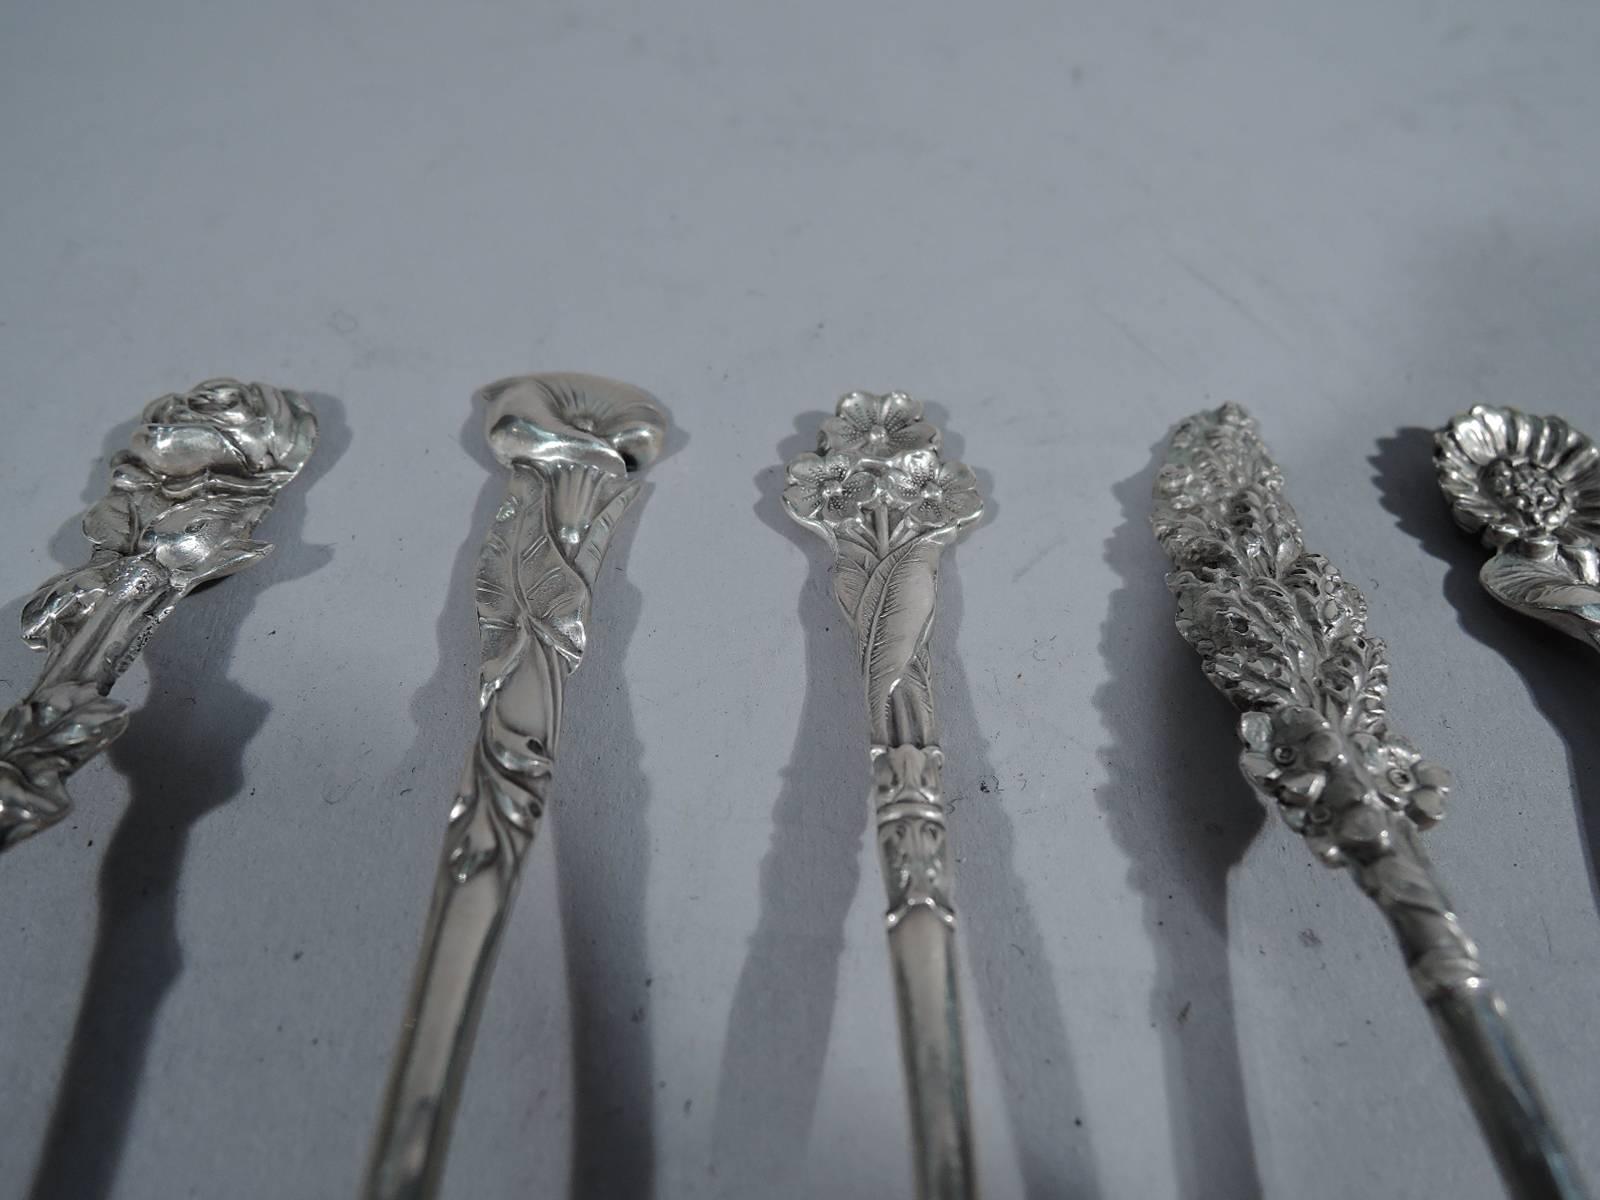 Set of 8 antique sterling silver demitasse spoons in Harlequin pattern. Made by Reed & Barton in Taunton, Mass. Each: Oval gilt bowl with shaped flower terminal. Each different including roses, forget me nots, and morning glories. A pretty bunch